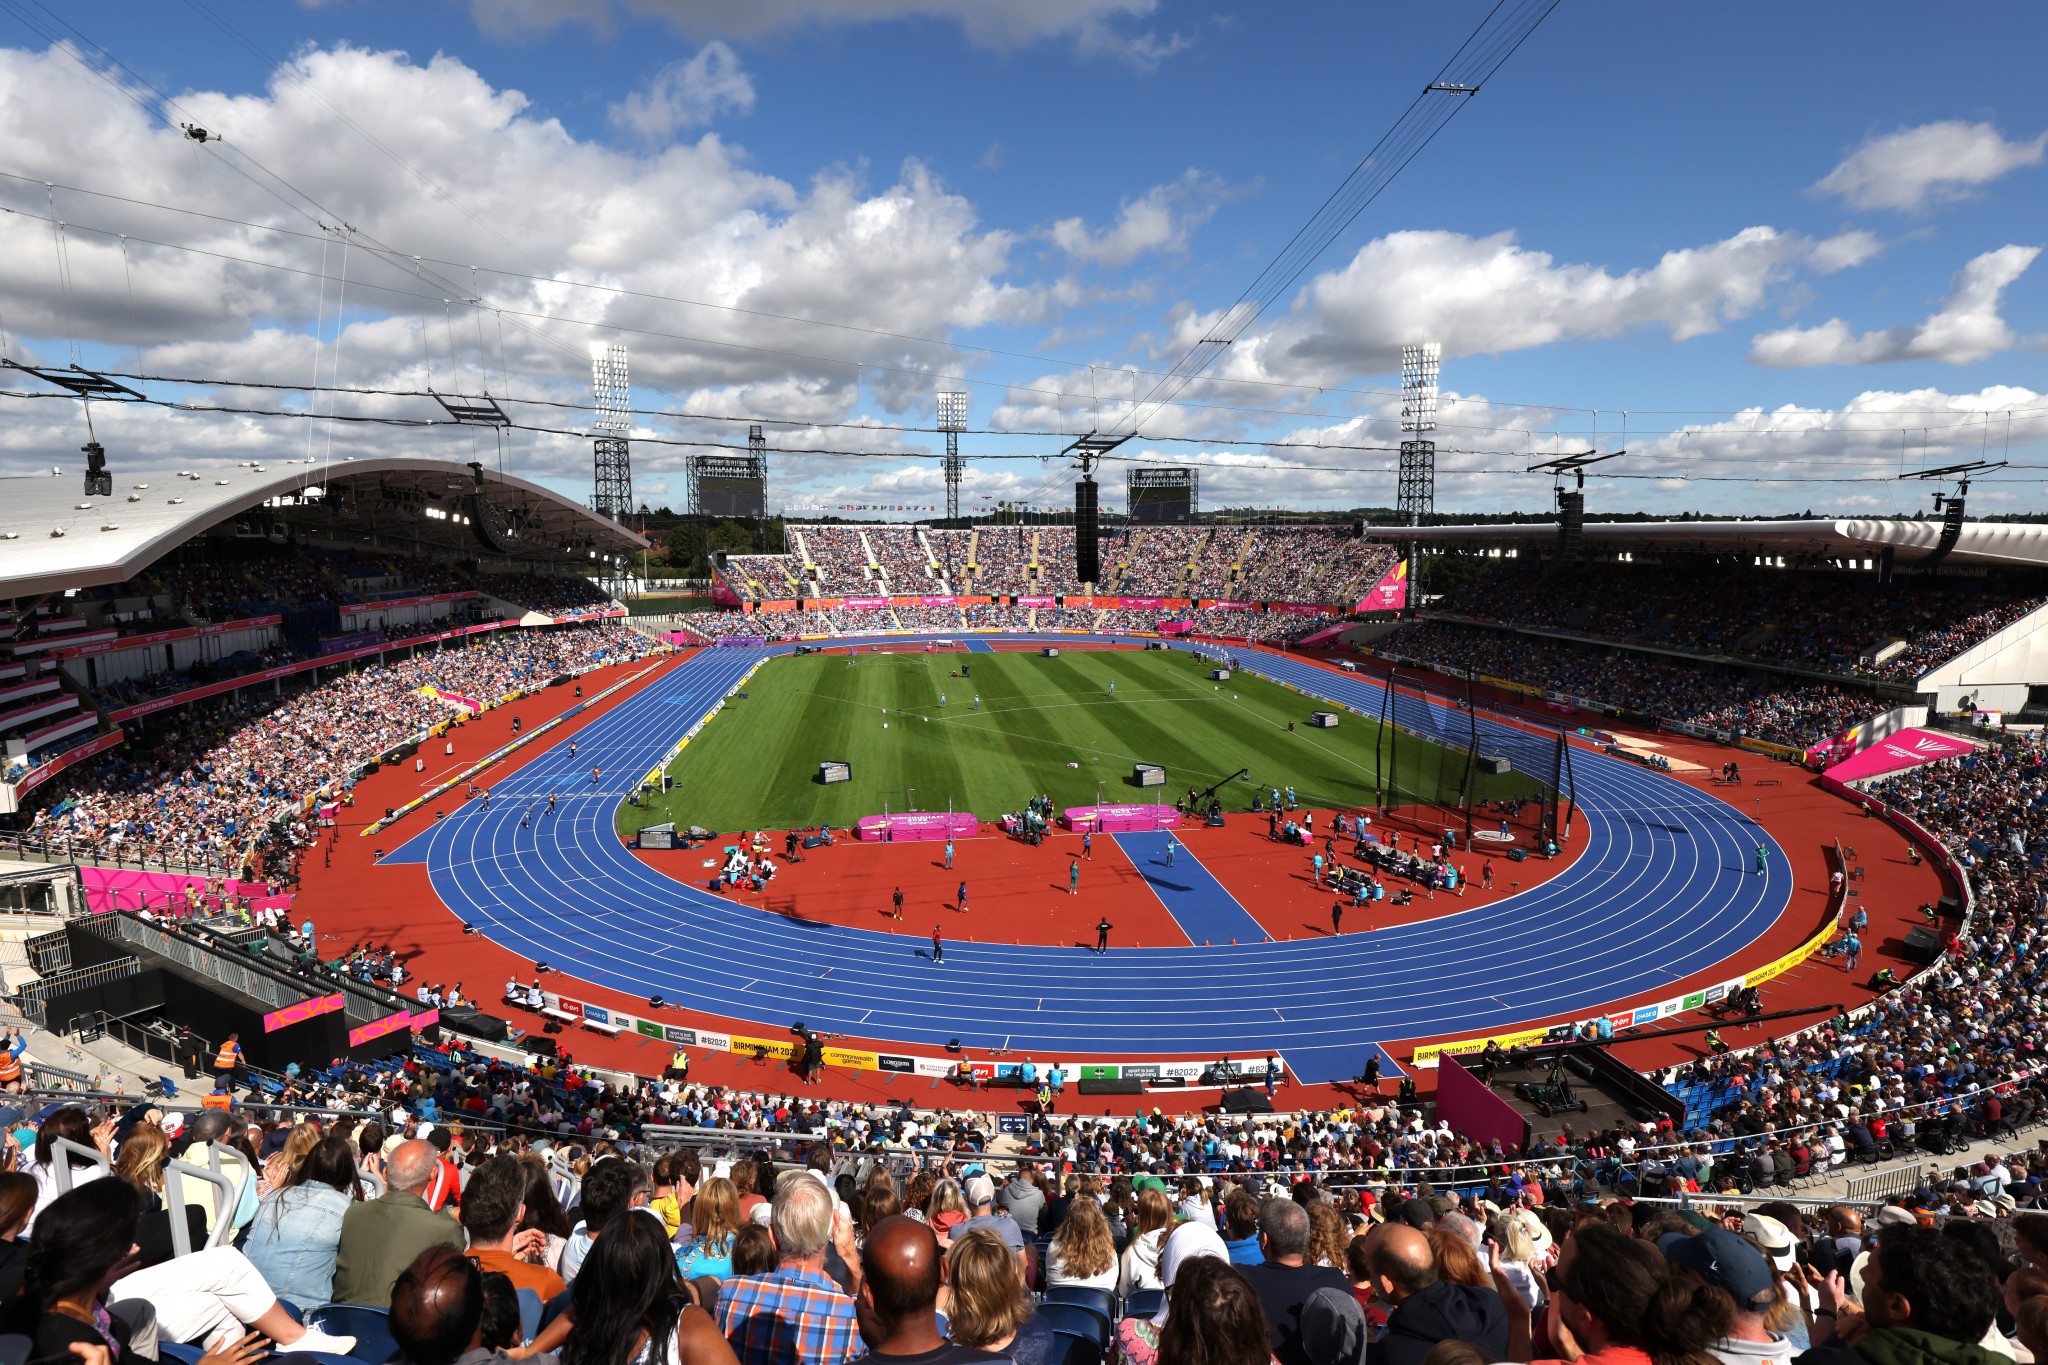 Alexander Stadium staged the Opening and Closing Ceremony and track and field competitions at Birmingham 2022 ©Getty Images